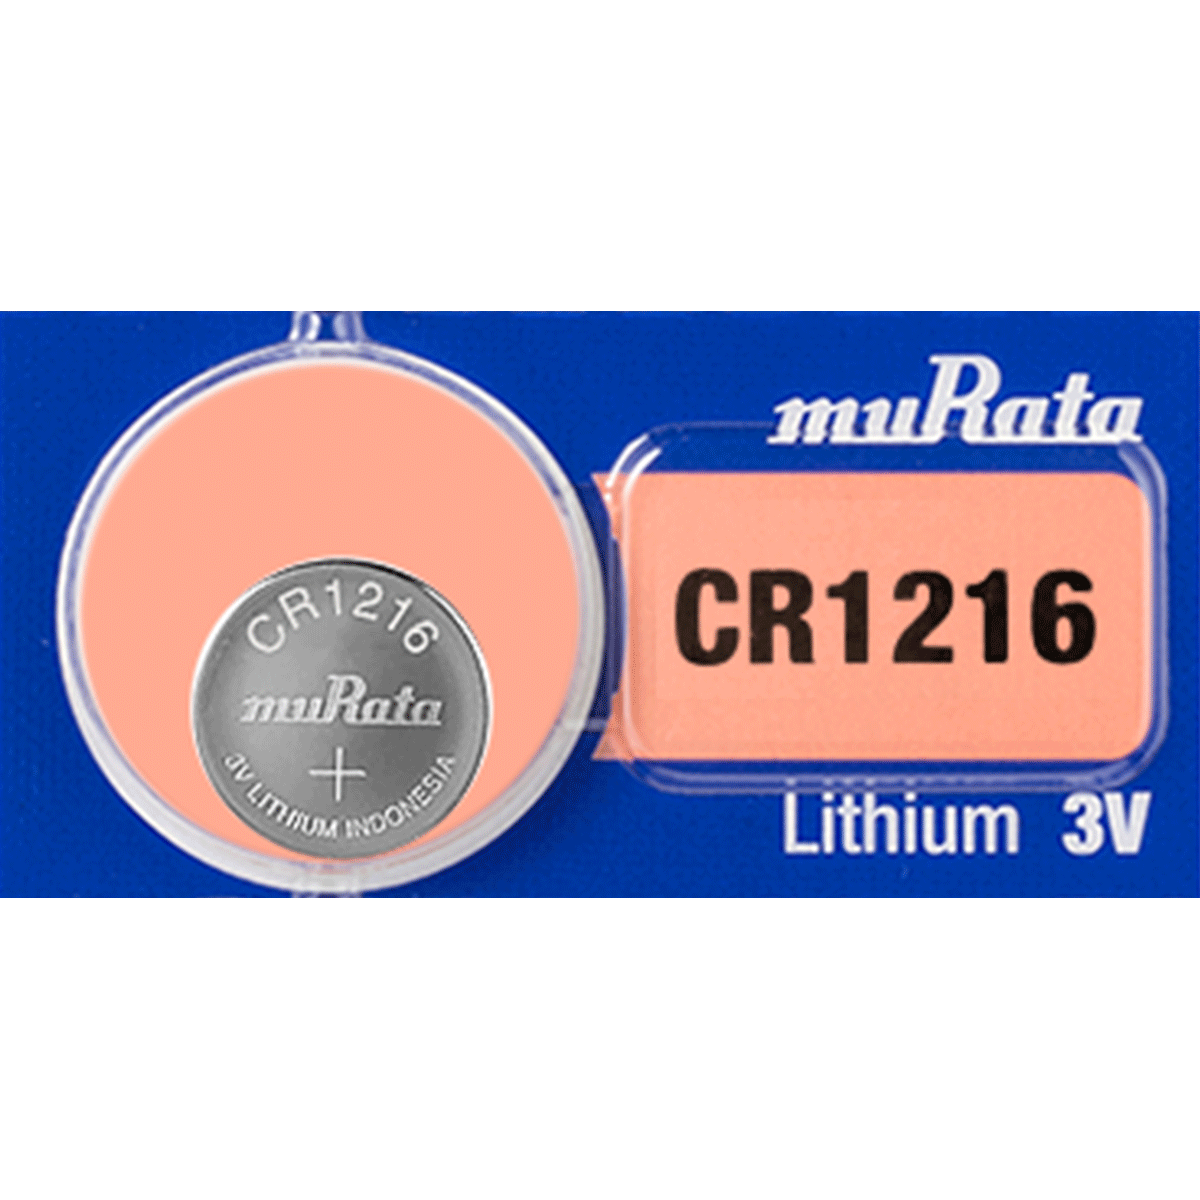 Murata CR1620 3V Lithium Coin Cell Batteries - Replaces Sony CR1620 (100  Pack)